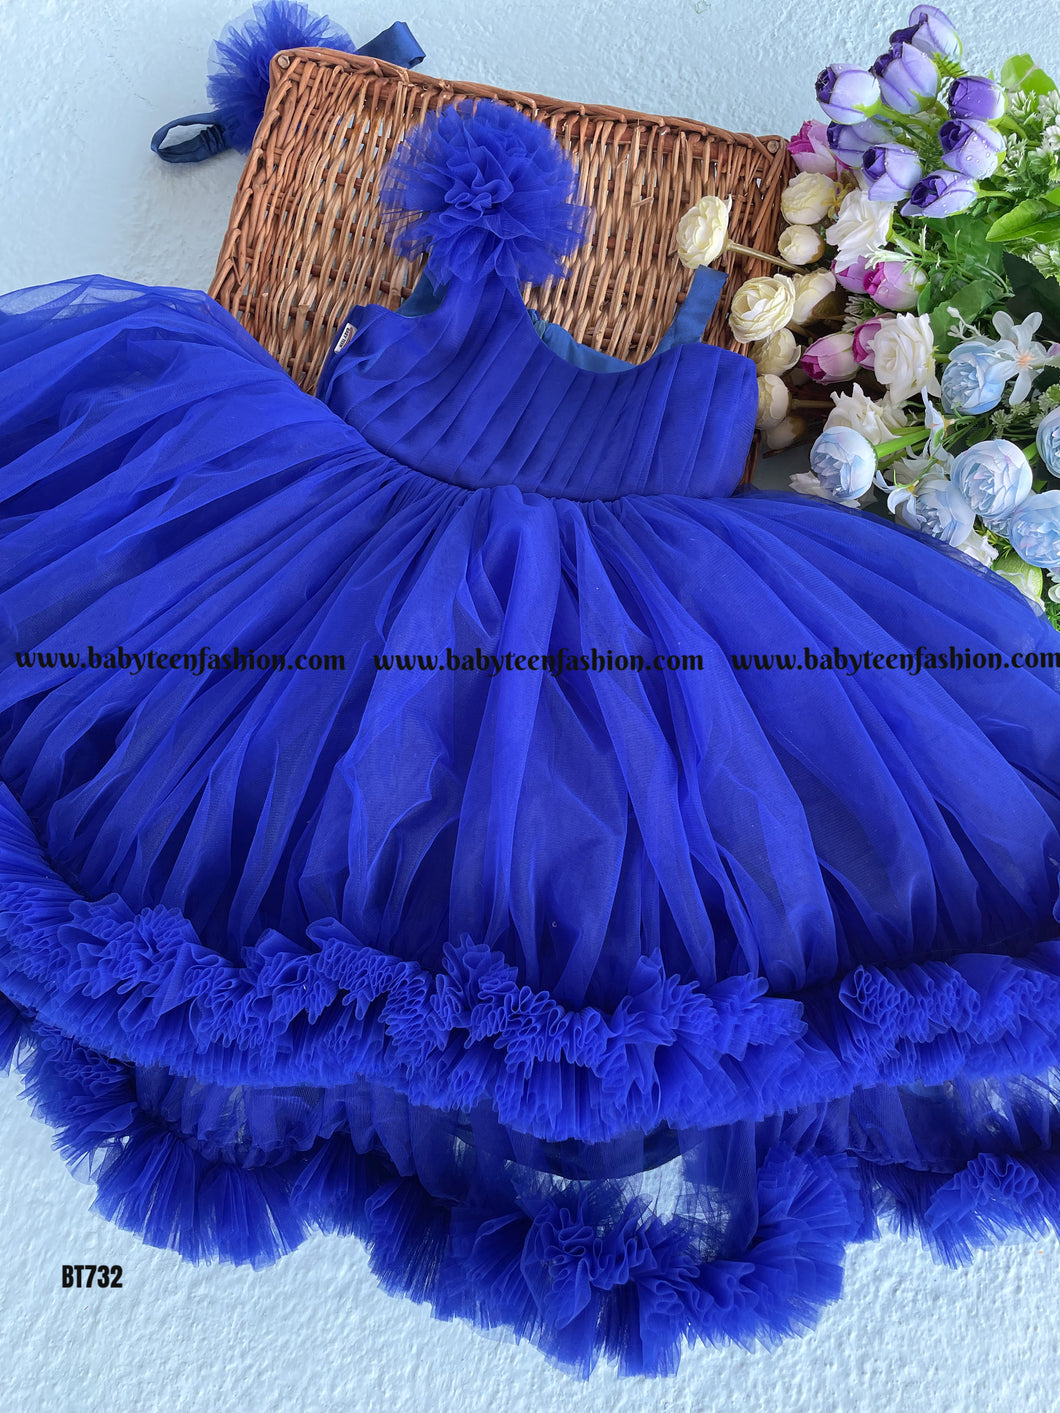 BT732Double Ruffled One shoulder Birthday Frock